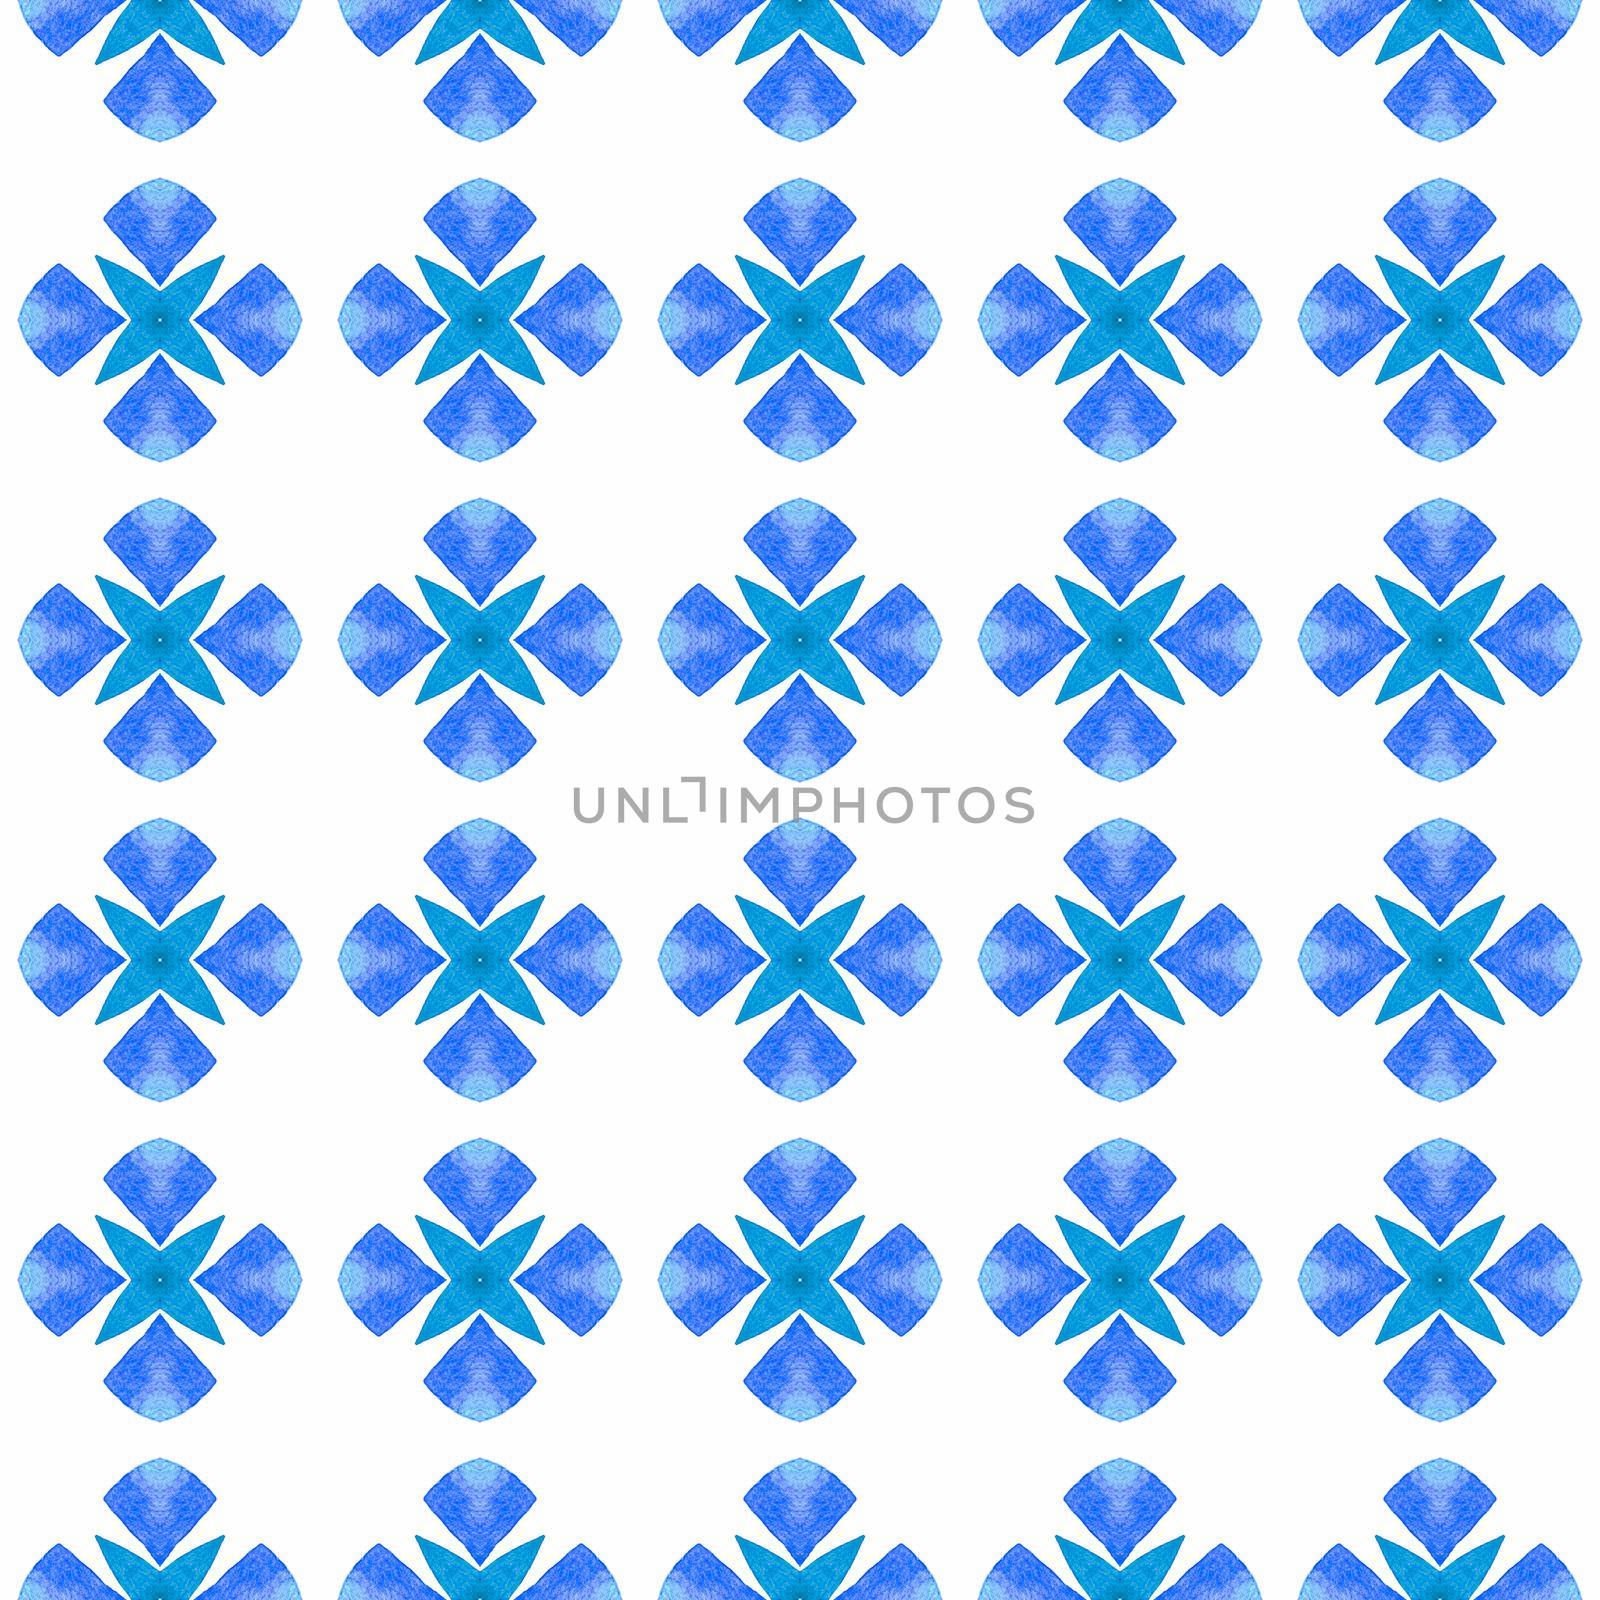 Hand drawn tropical seamless border. Blue radiant boho chic summer design. Tropical seamless pattern. Textile ready adorable print, swimwear fabric, wallpaper, wrapping.